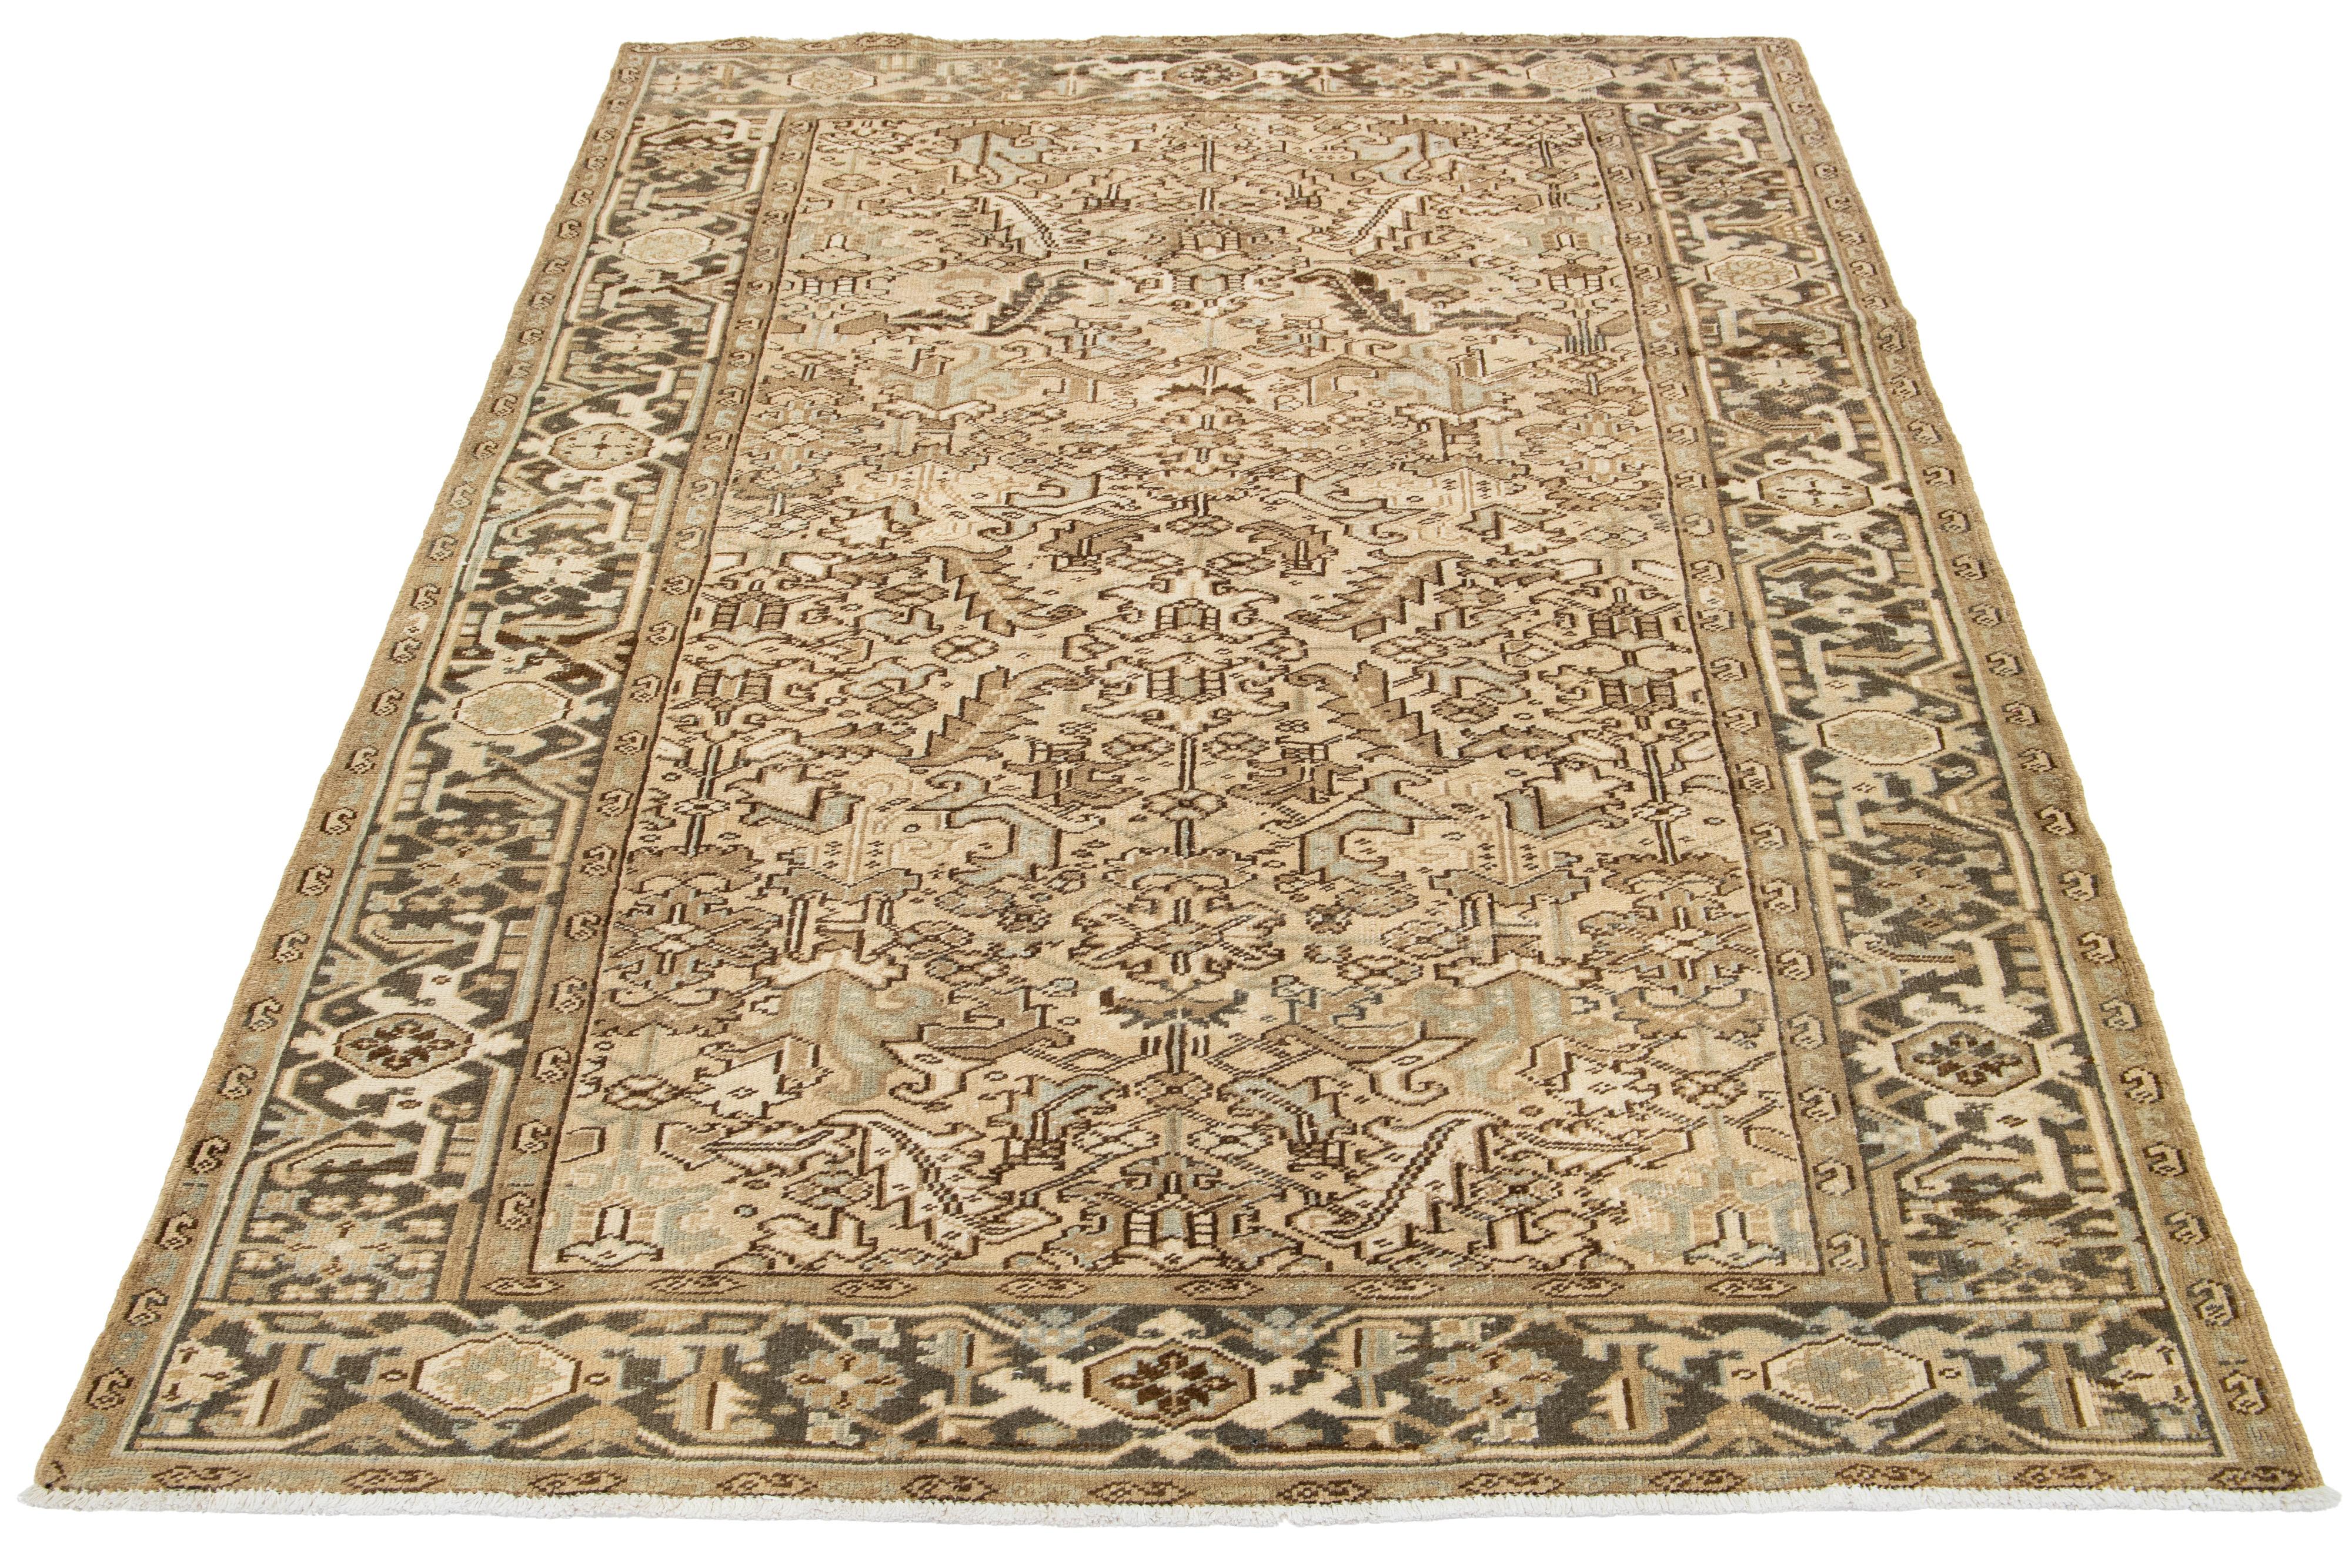 Antique Persian Heriz rug with blue and light brown all-over pattern on a beige field. Hand-knotted wool.

This rug measures 6'9' x 9'8